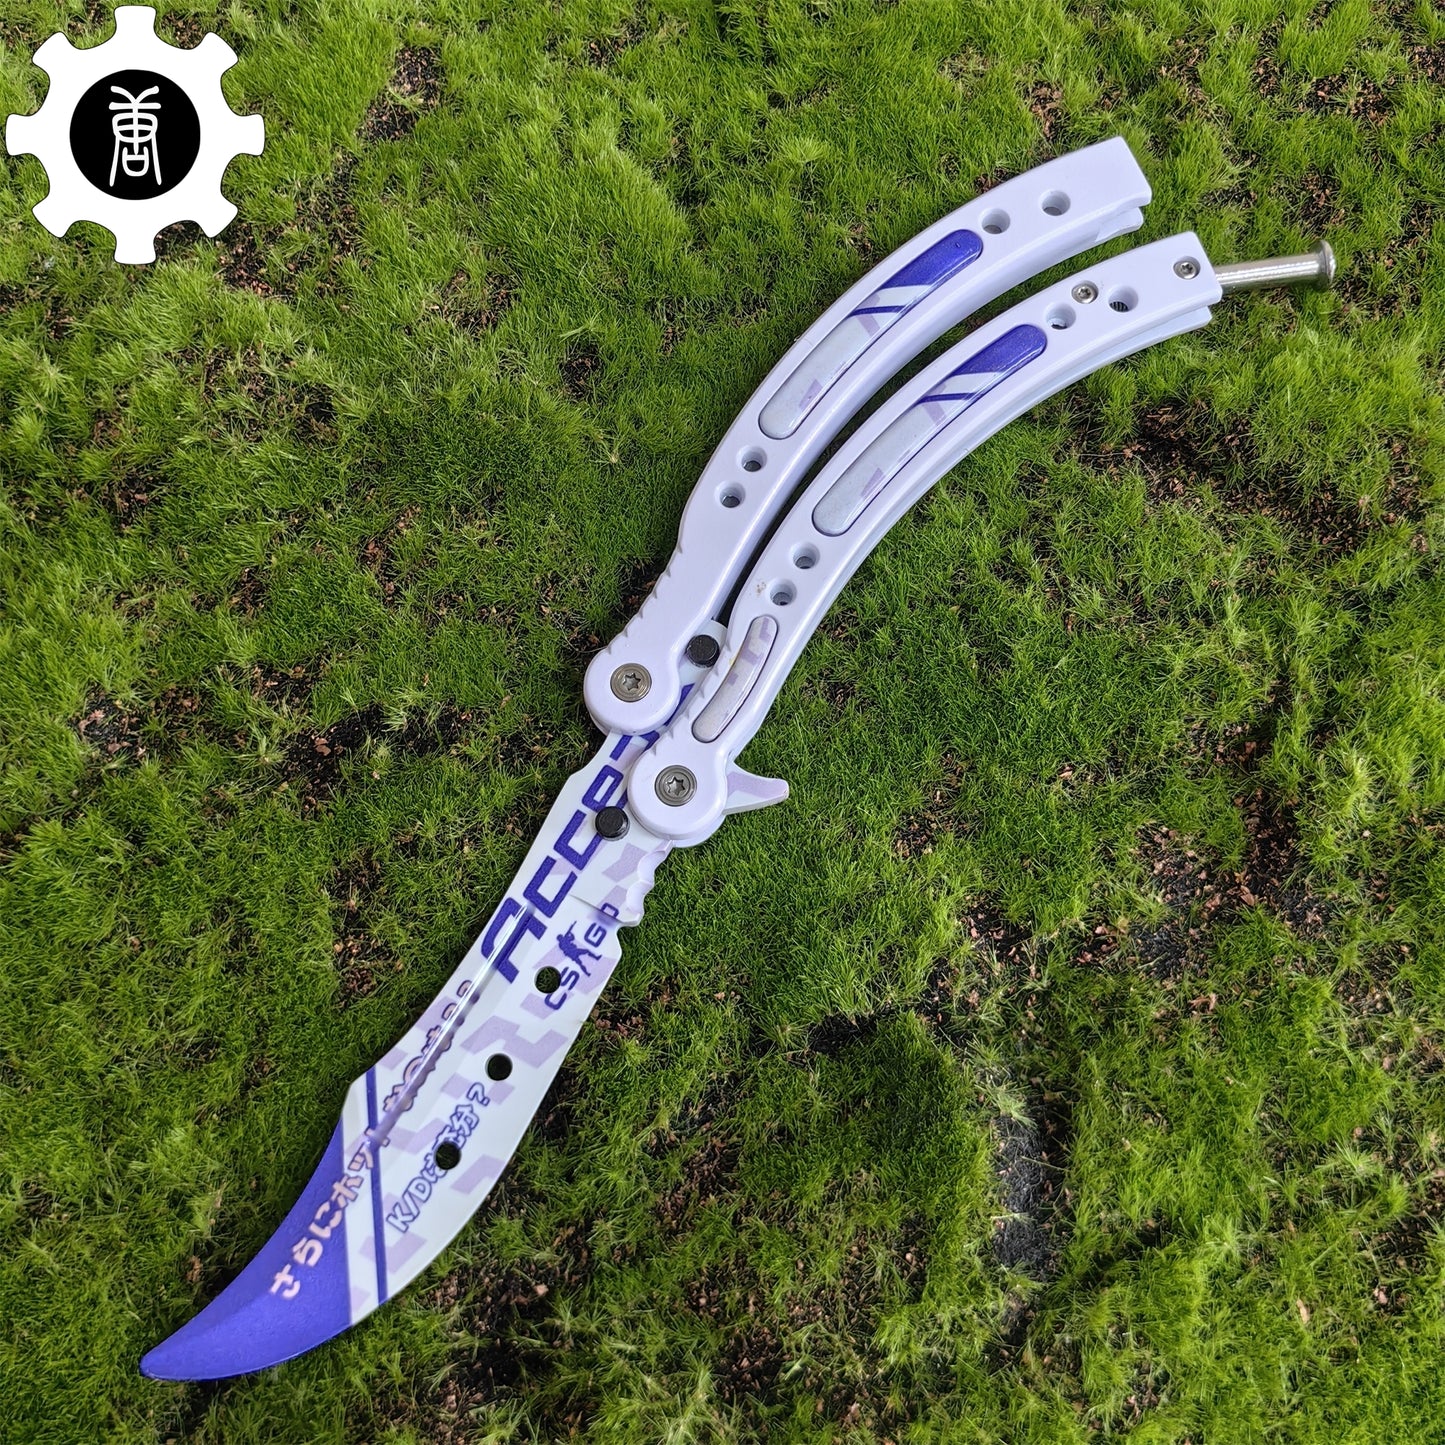 Game Butterfly Knife Trainers Blunt Blade Balisong Collection